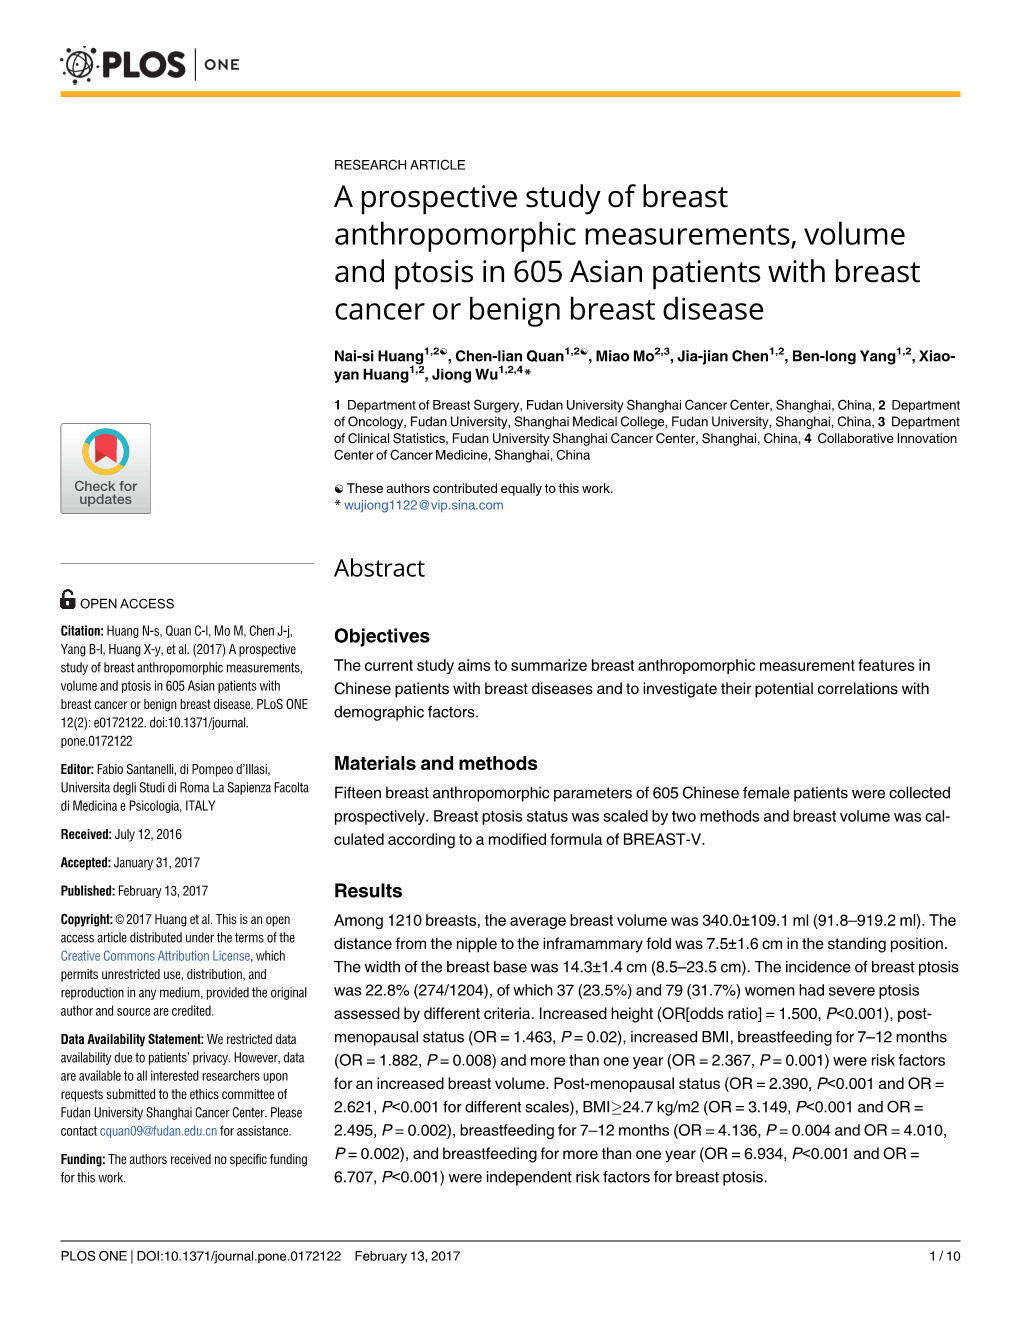 A Prospective Study of Breast Anthropomorphic Measurements, Volume and Ptosis in 605 Asian Patients with Breast Cancer Or Benign Breast Disease